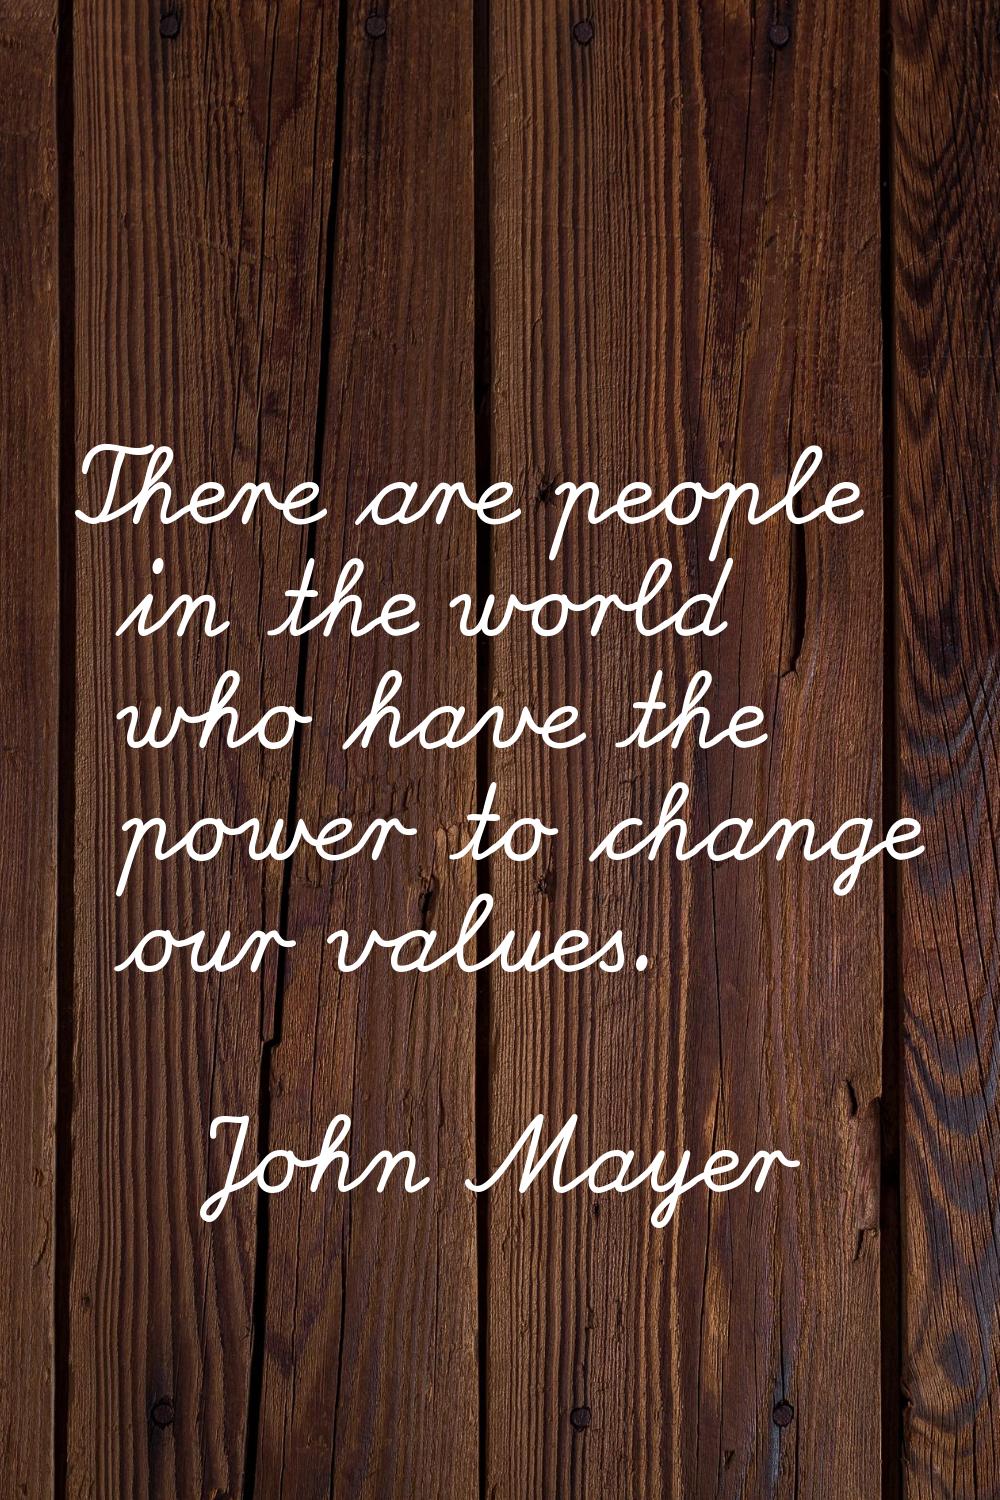 There are people in the world who have the power to change our values.